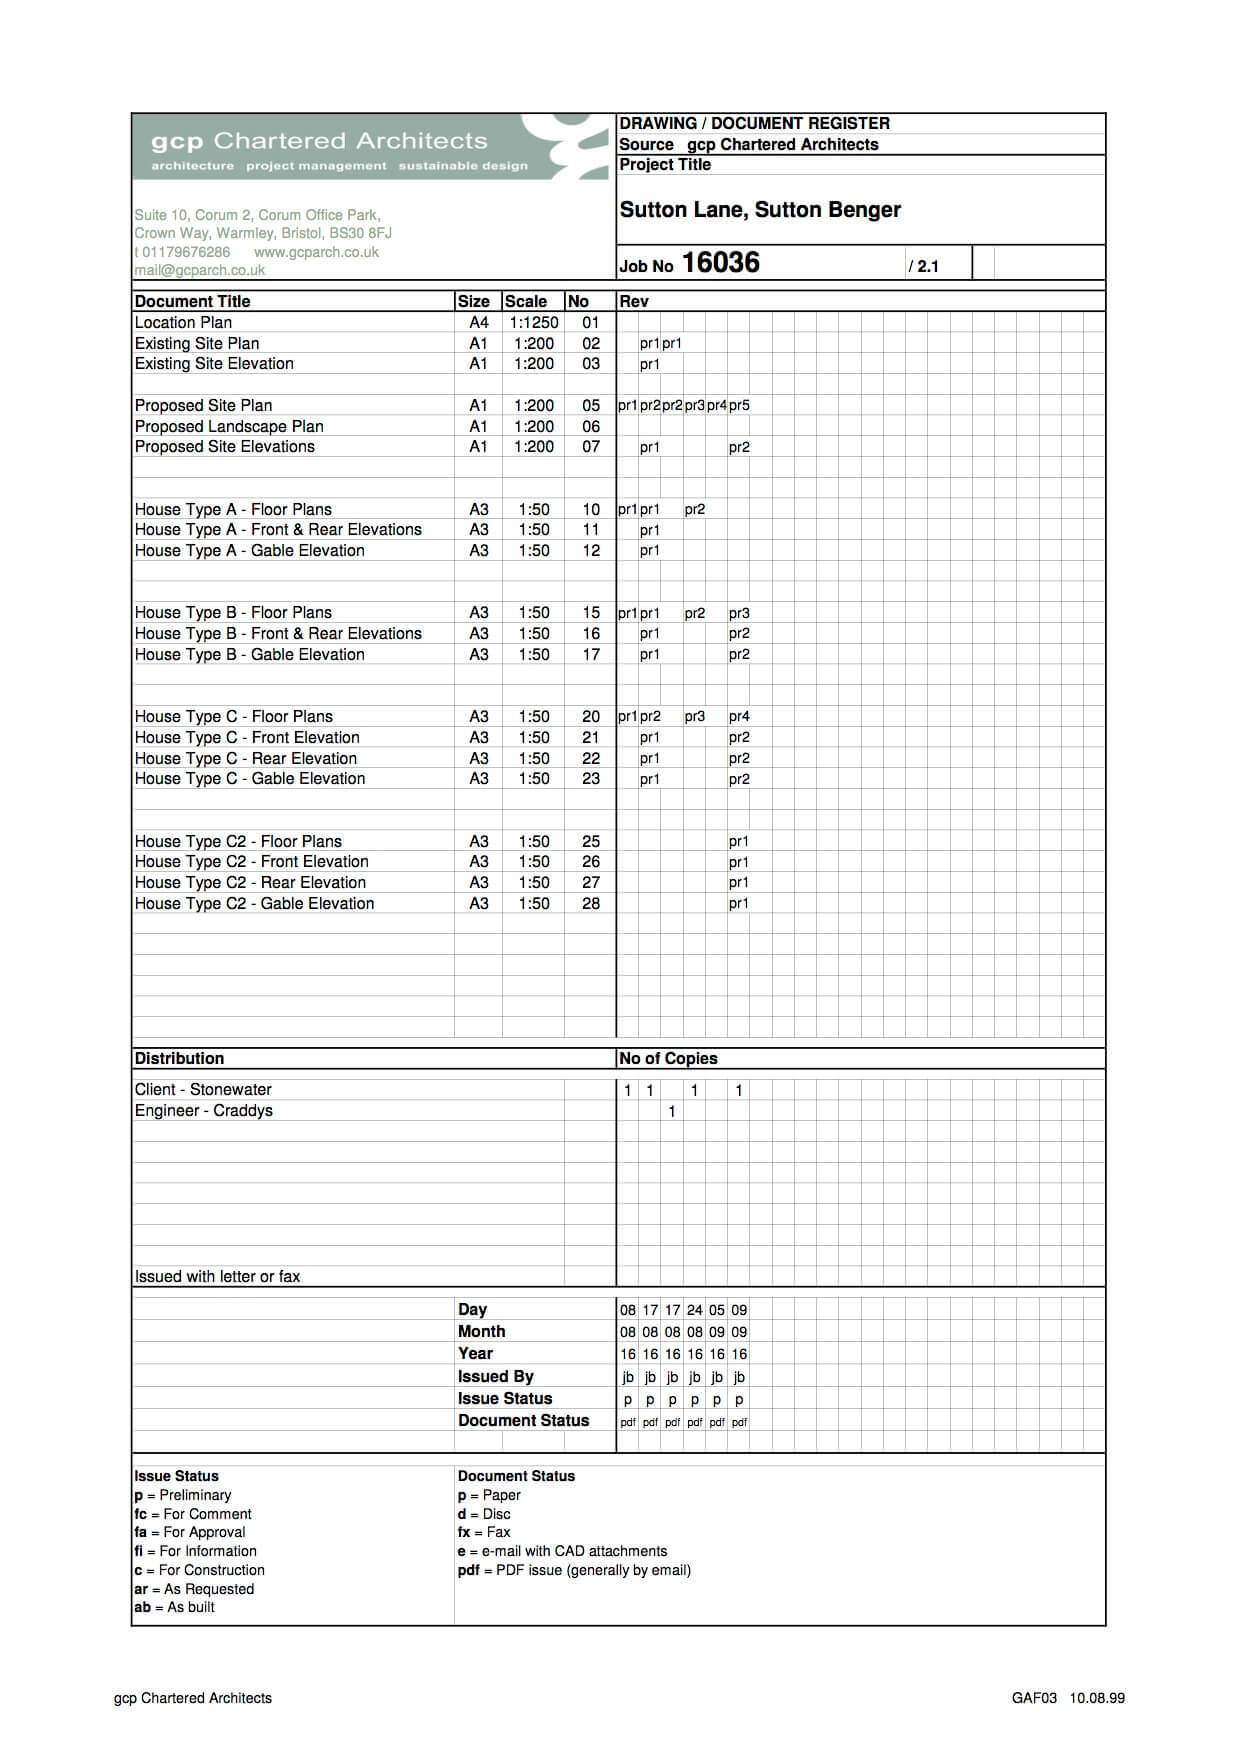 Stonewater Issue Sheet